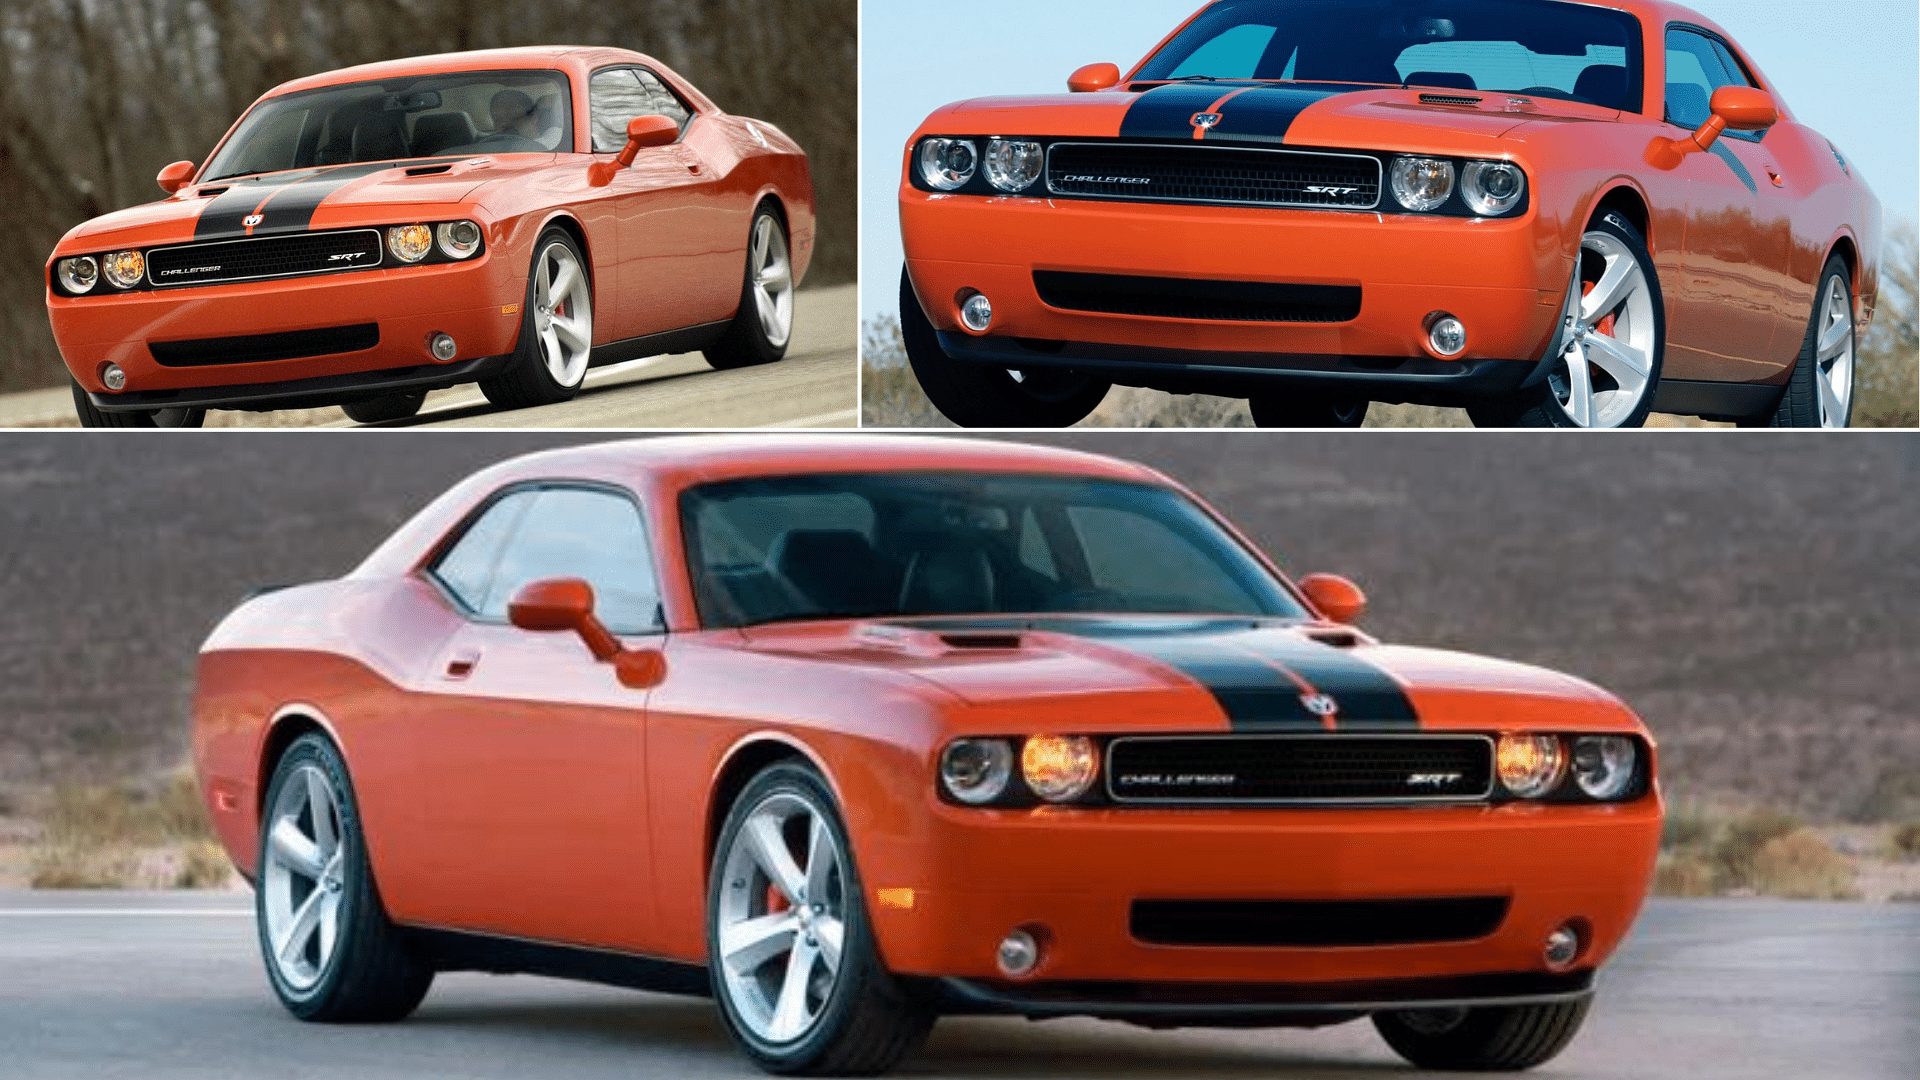 2008 Dodge Challenger SRT8 coupe in red